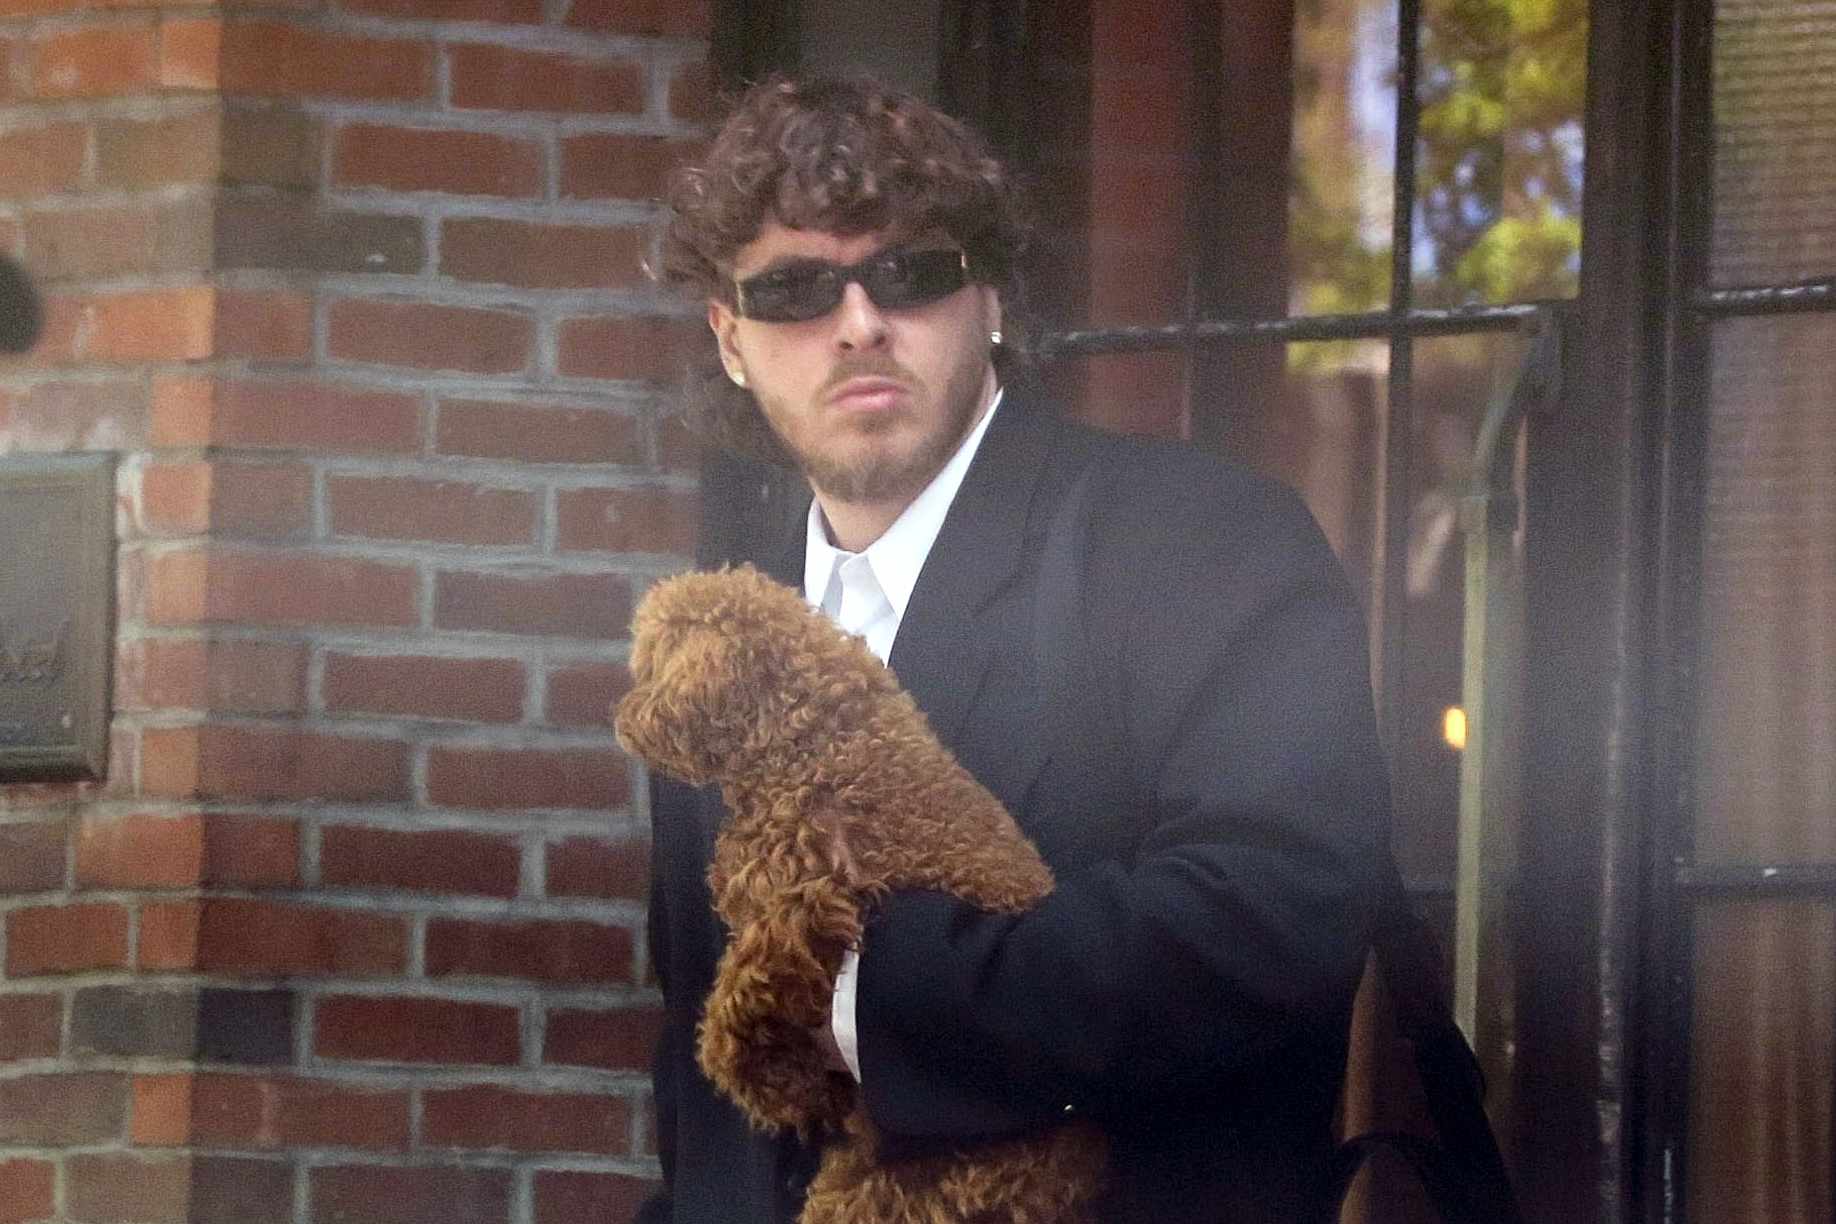 Jack Harlow wears dark sunglasses, a black suit, and his curly-haired dog